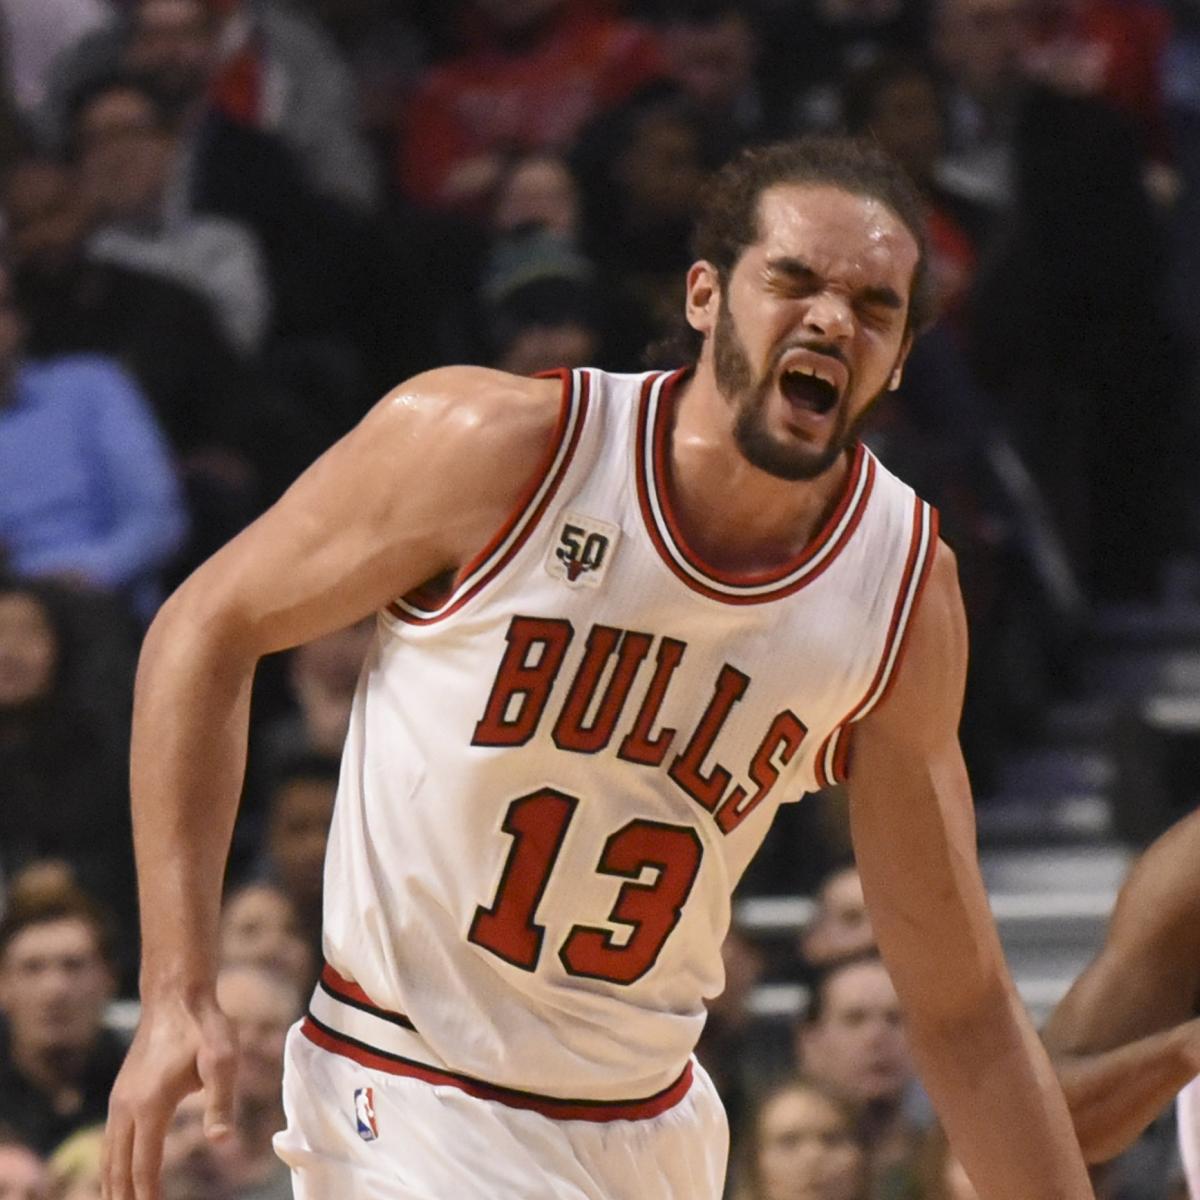 Bulls star Joakim Noah's passion for adopted Chicago shows through